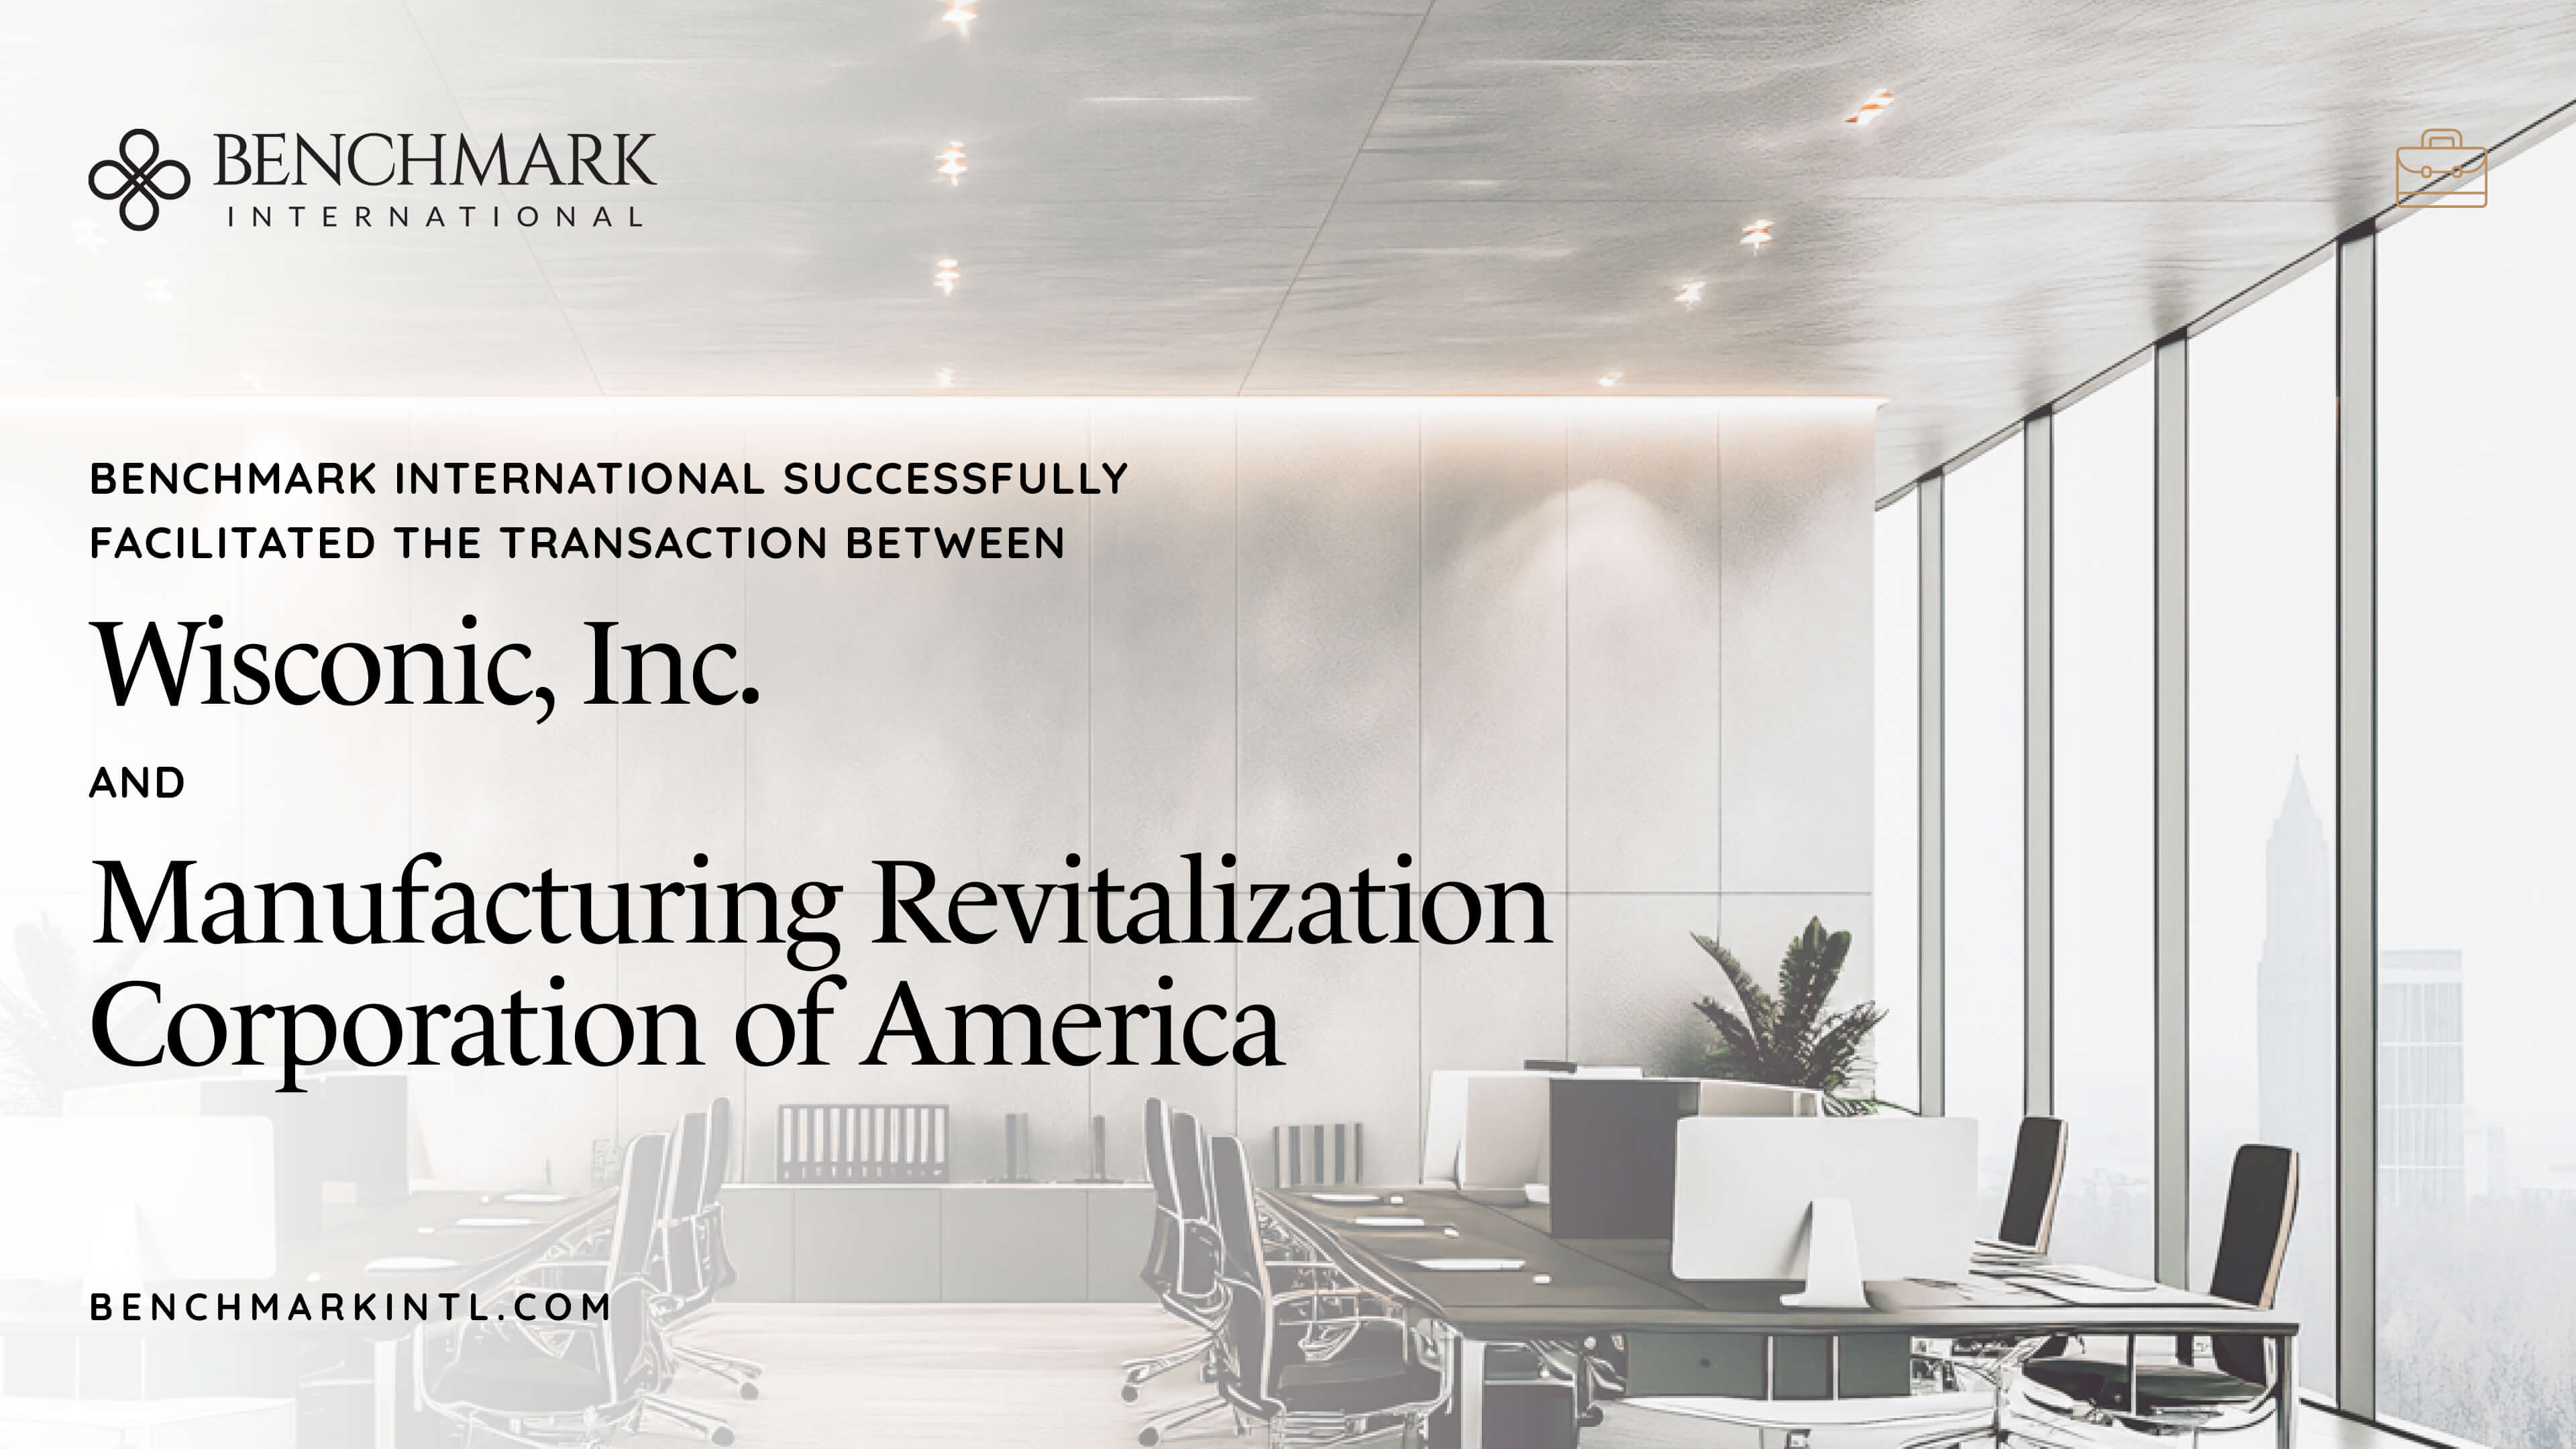 Benchmark International Successfully Facilitated the Transaction Between Wisconic, Inc. and Manufacturing Revitalization Corporation of America